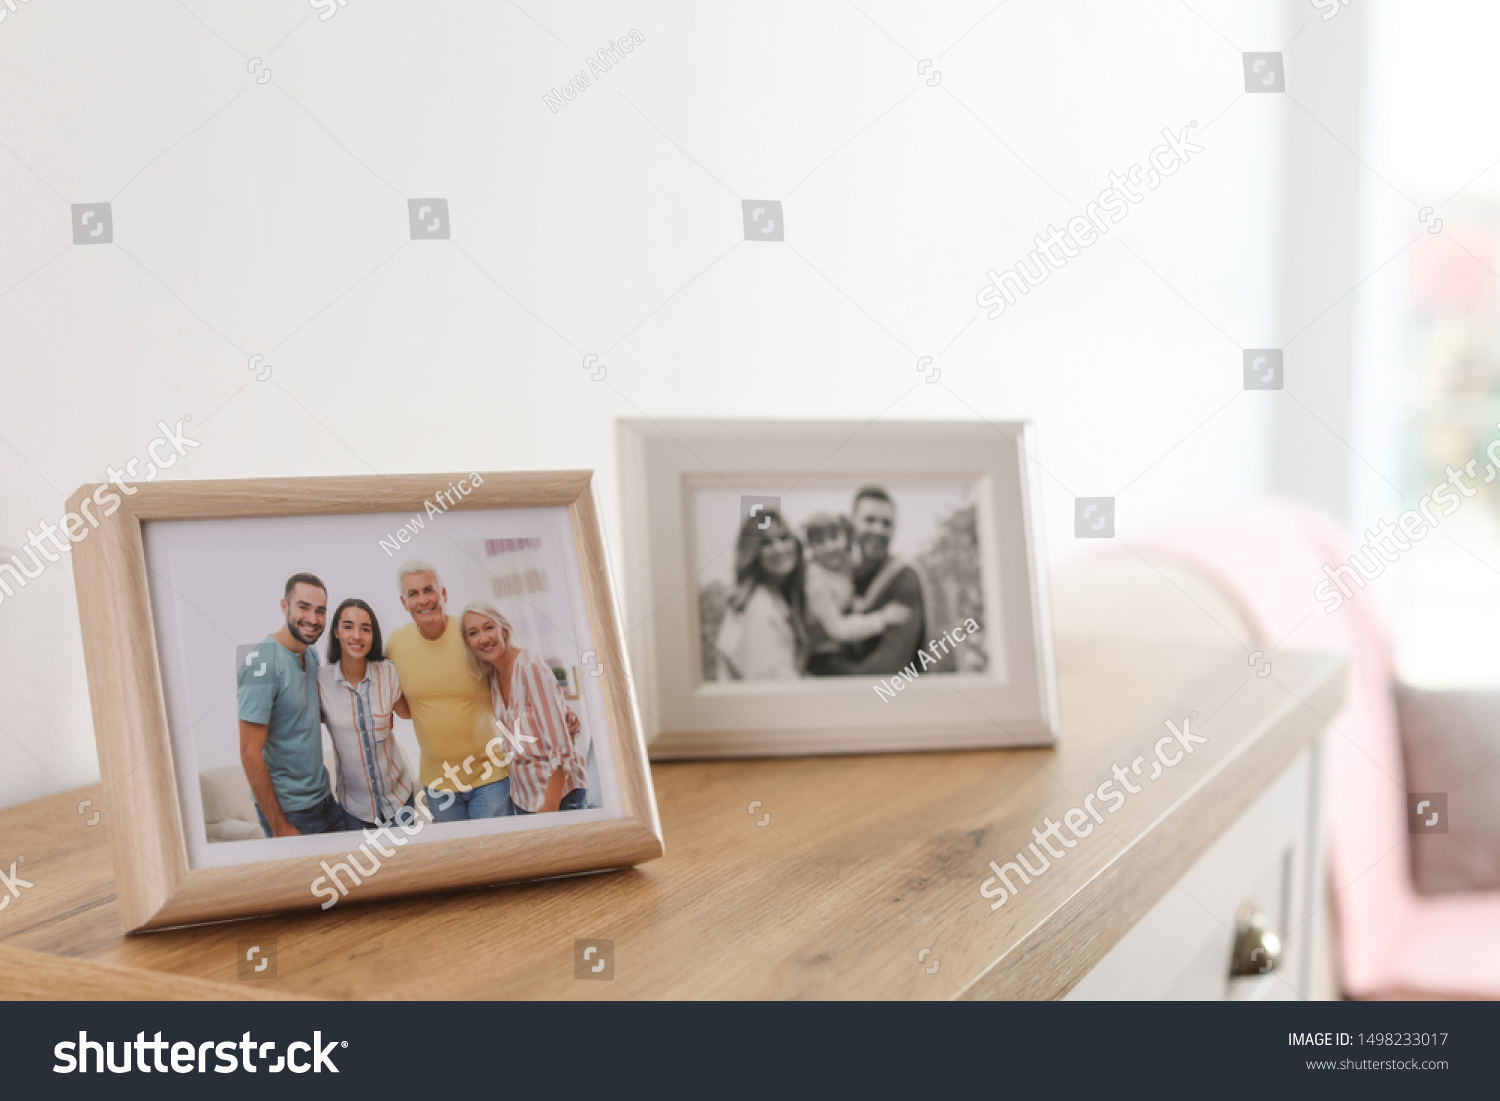 Family portraits in frames on cabinet indoors #1498233017